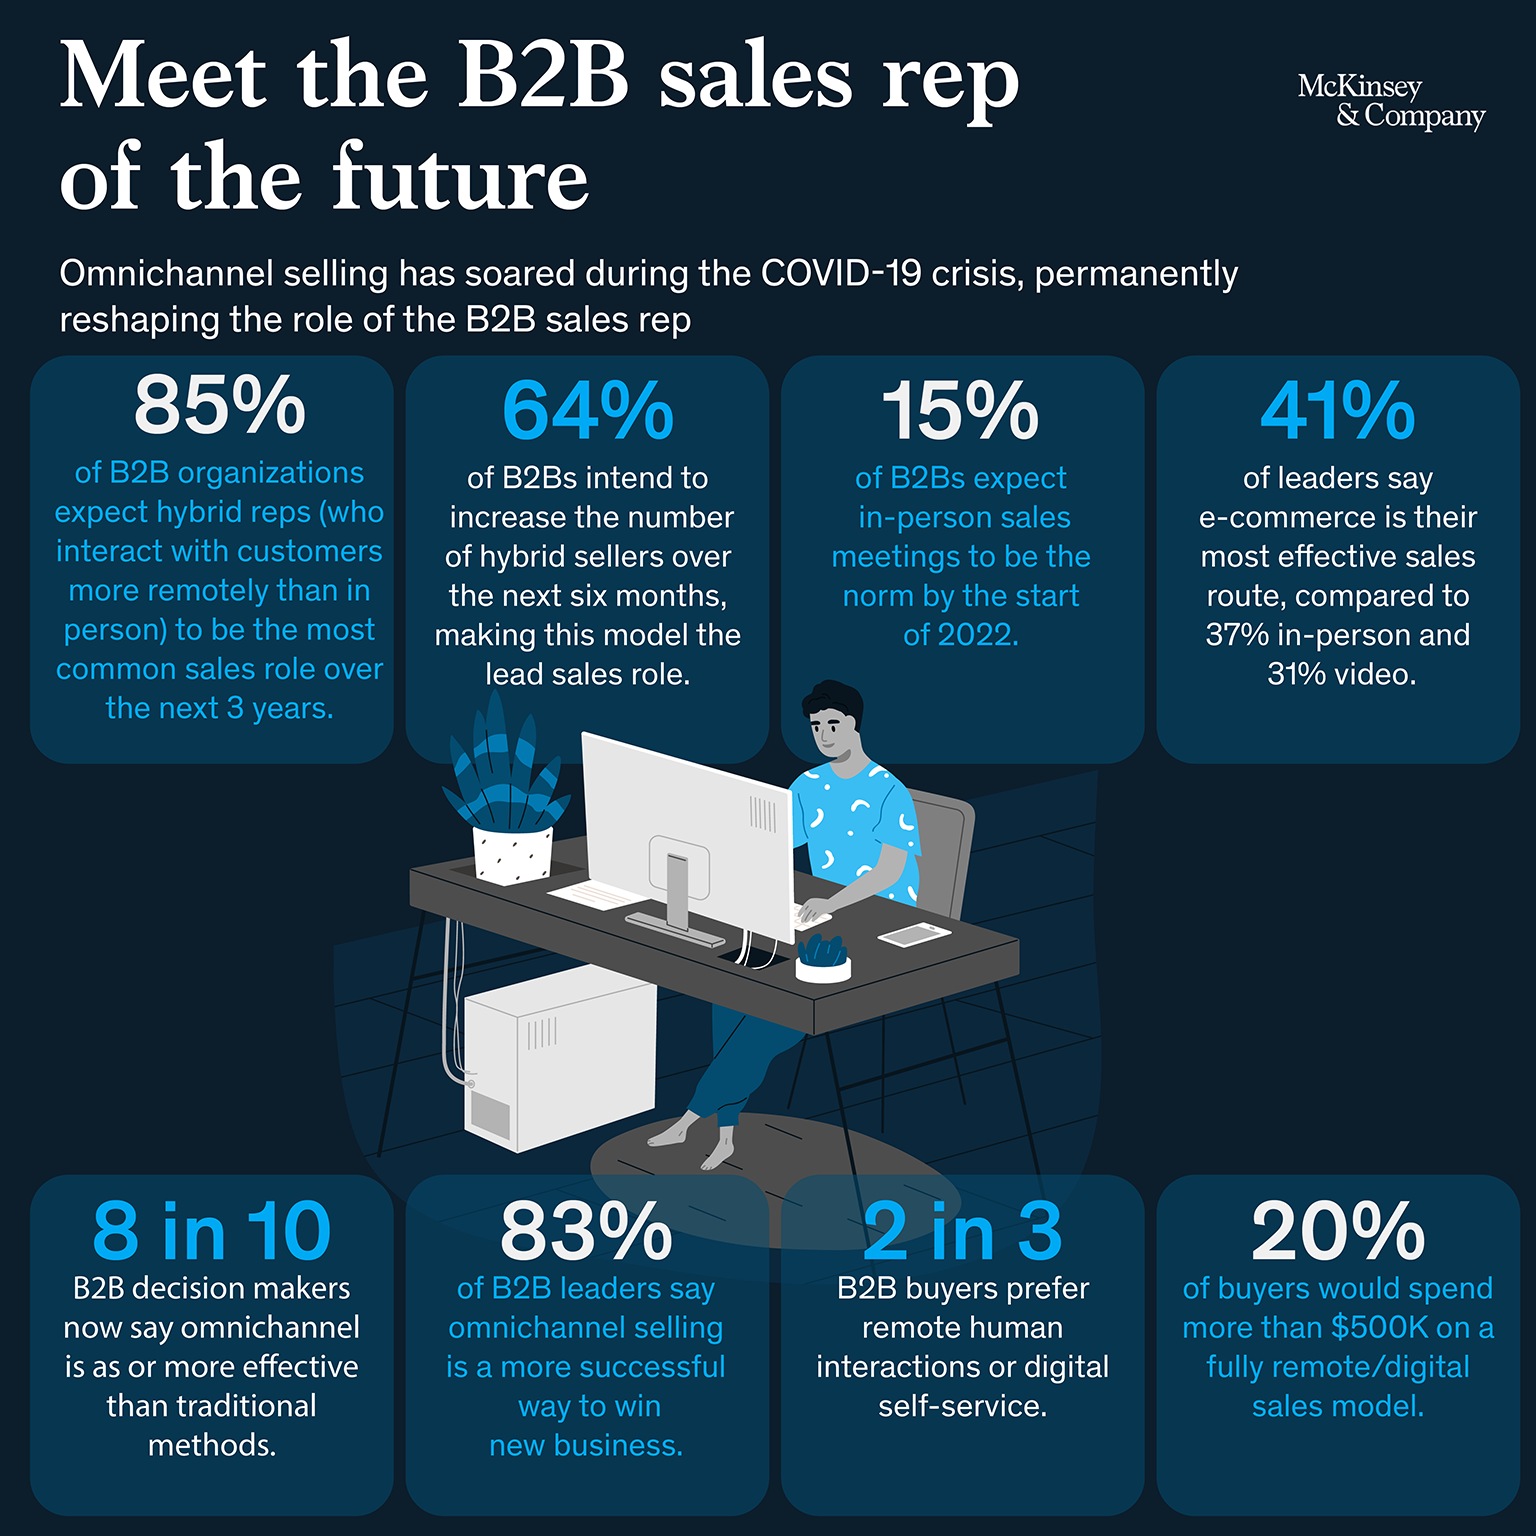 Meet the B2B sales rep of the future